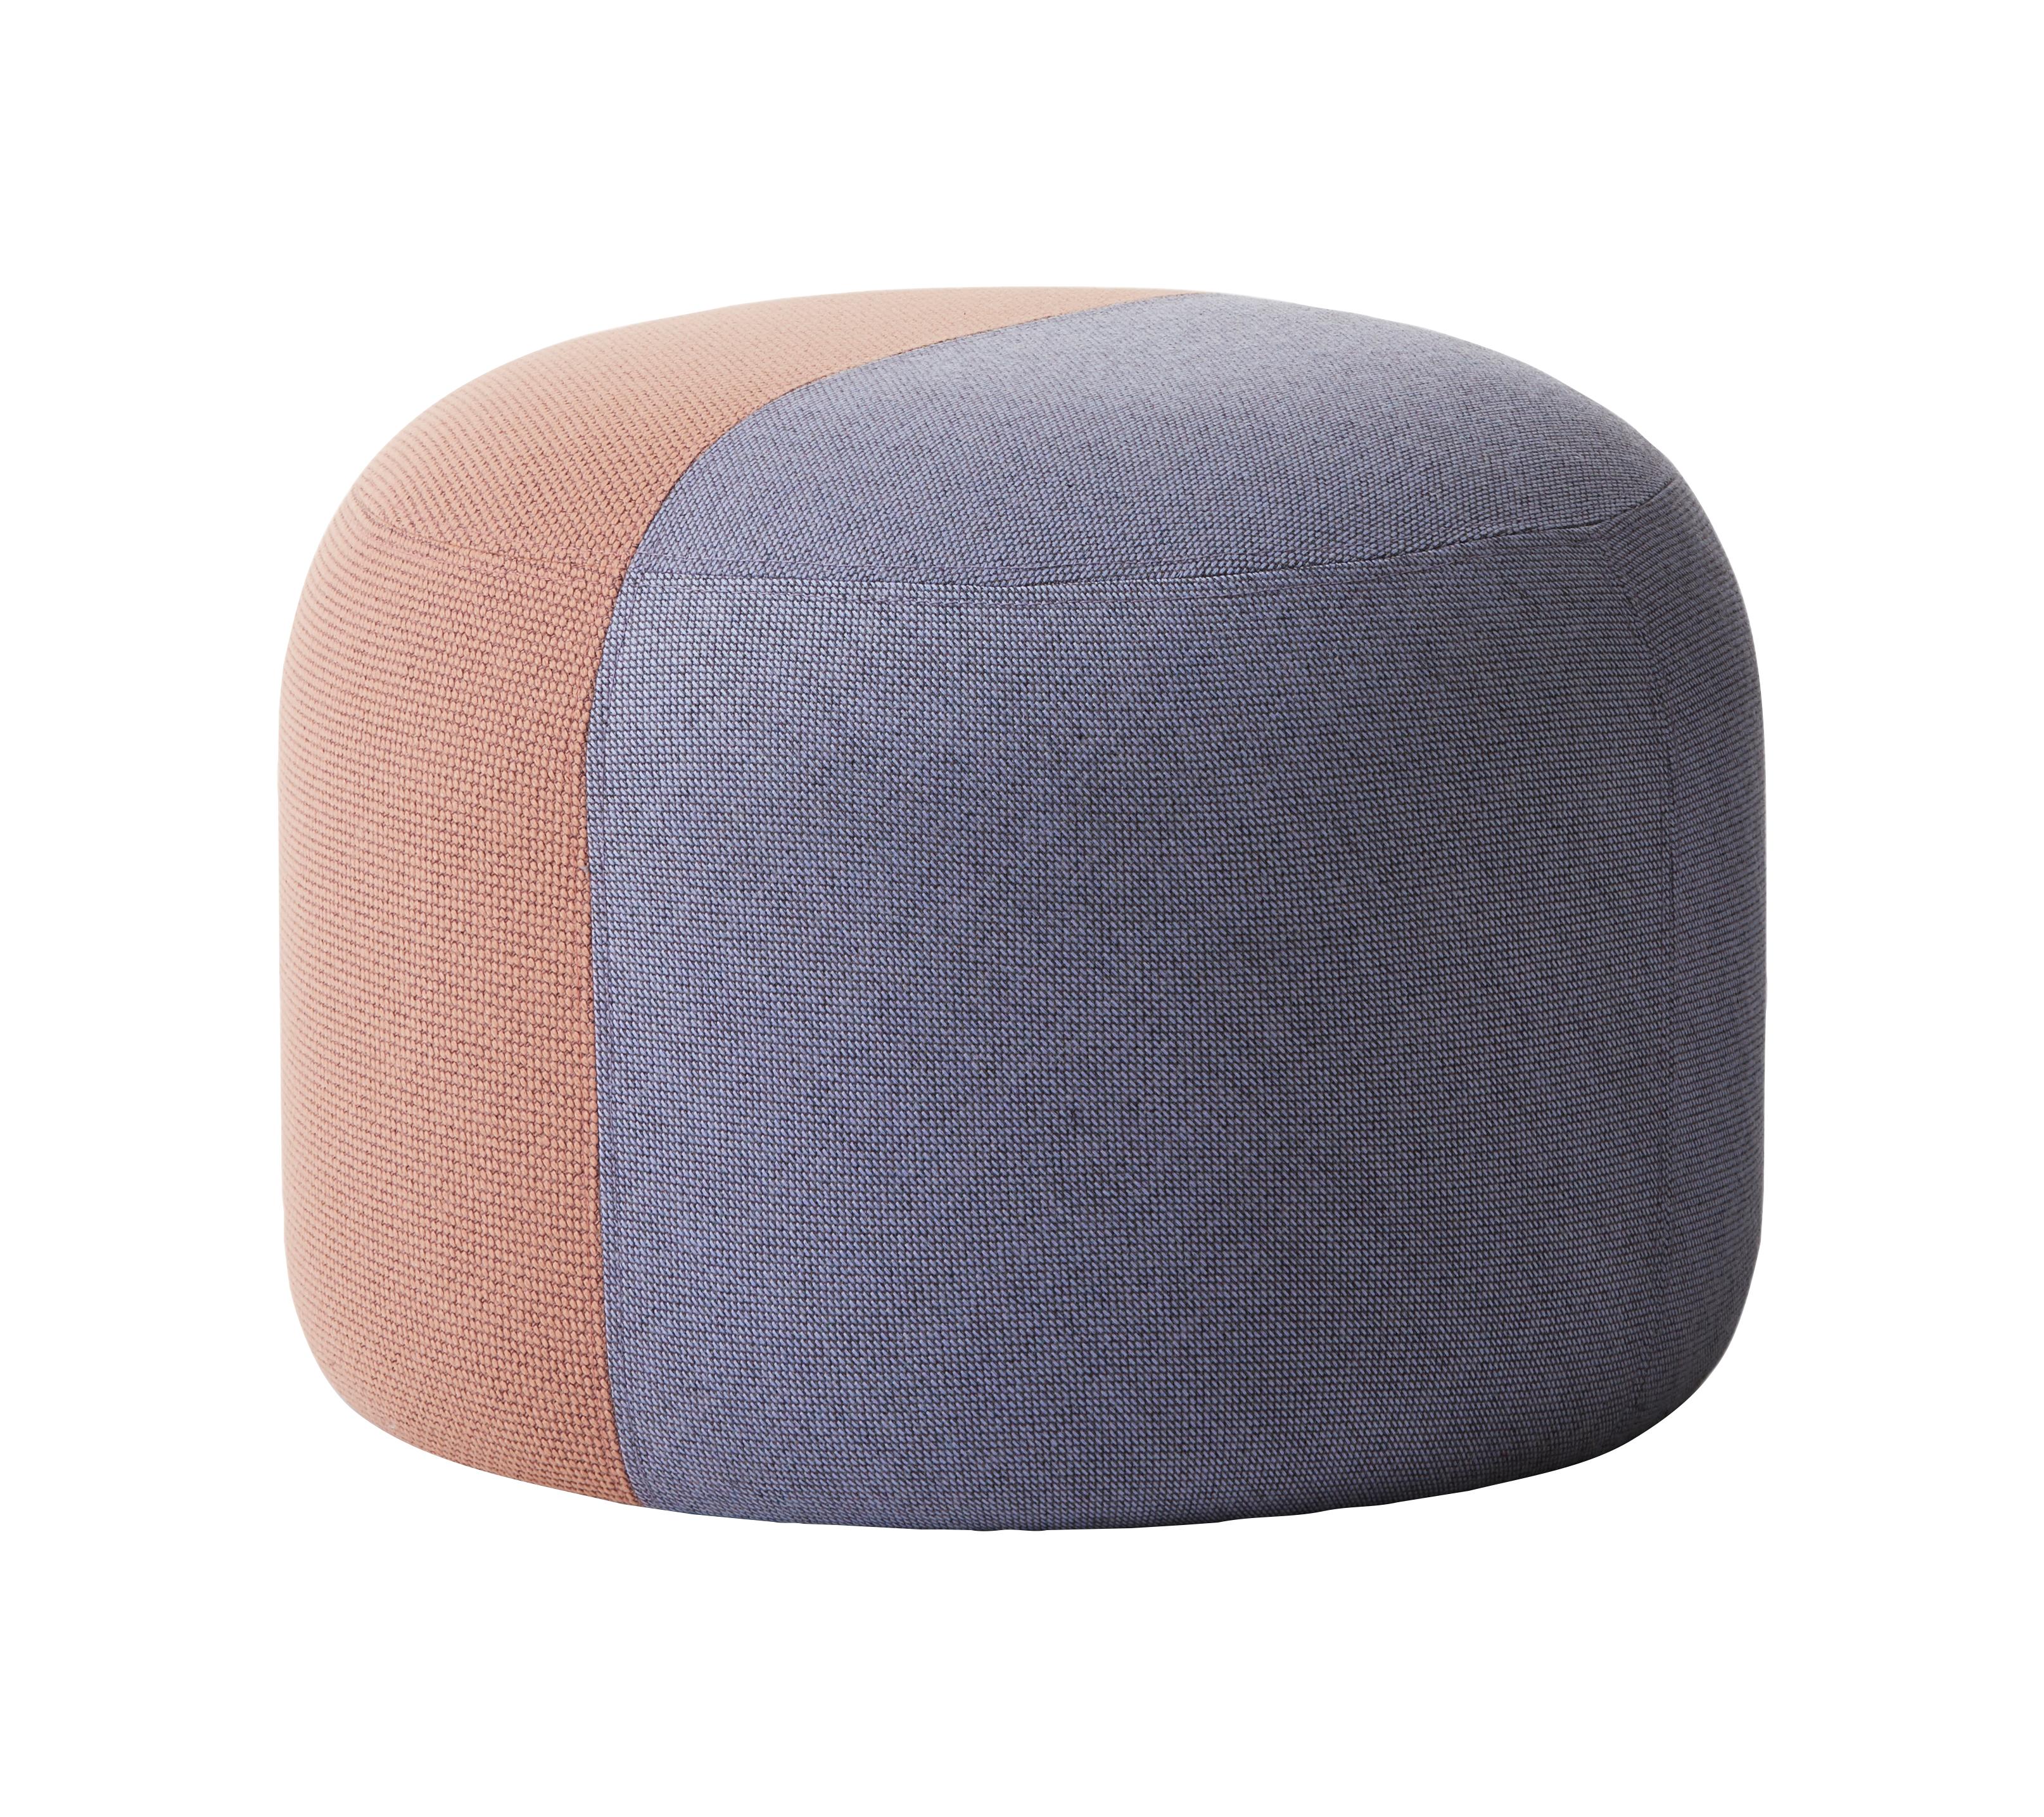 For Sale: Pink (Merit035,Rewo658) Dainty Pouf, by Charlotte Høncke from Warm Nordic